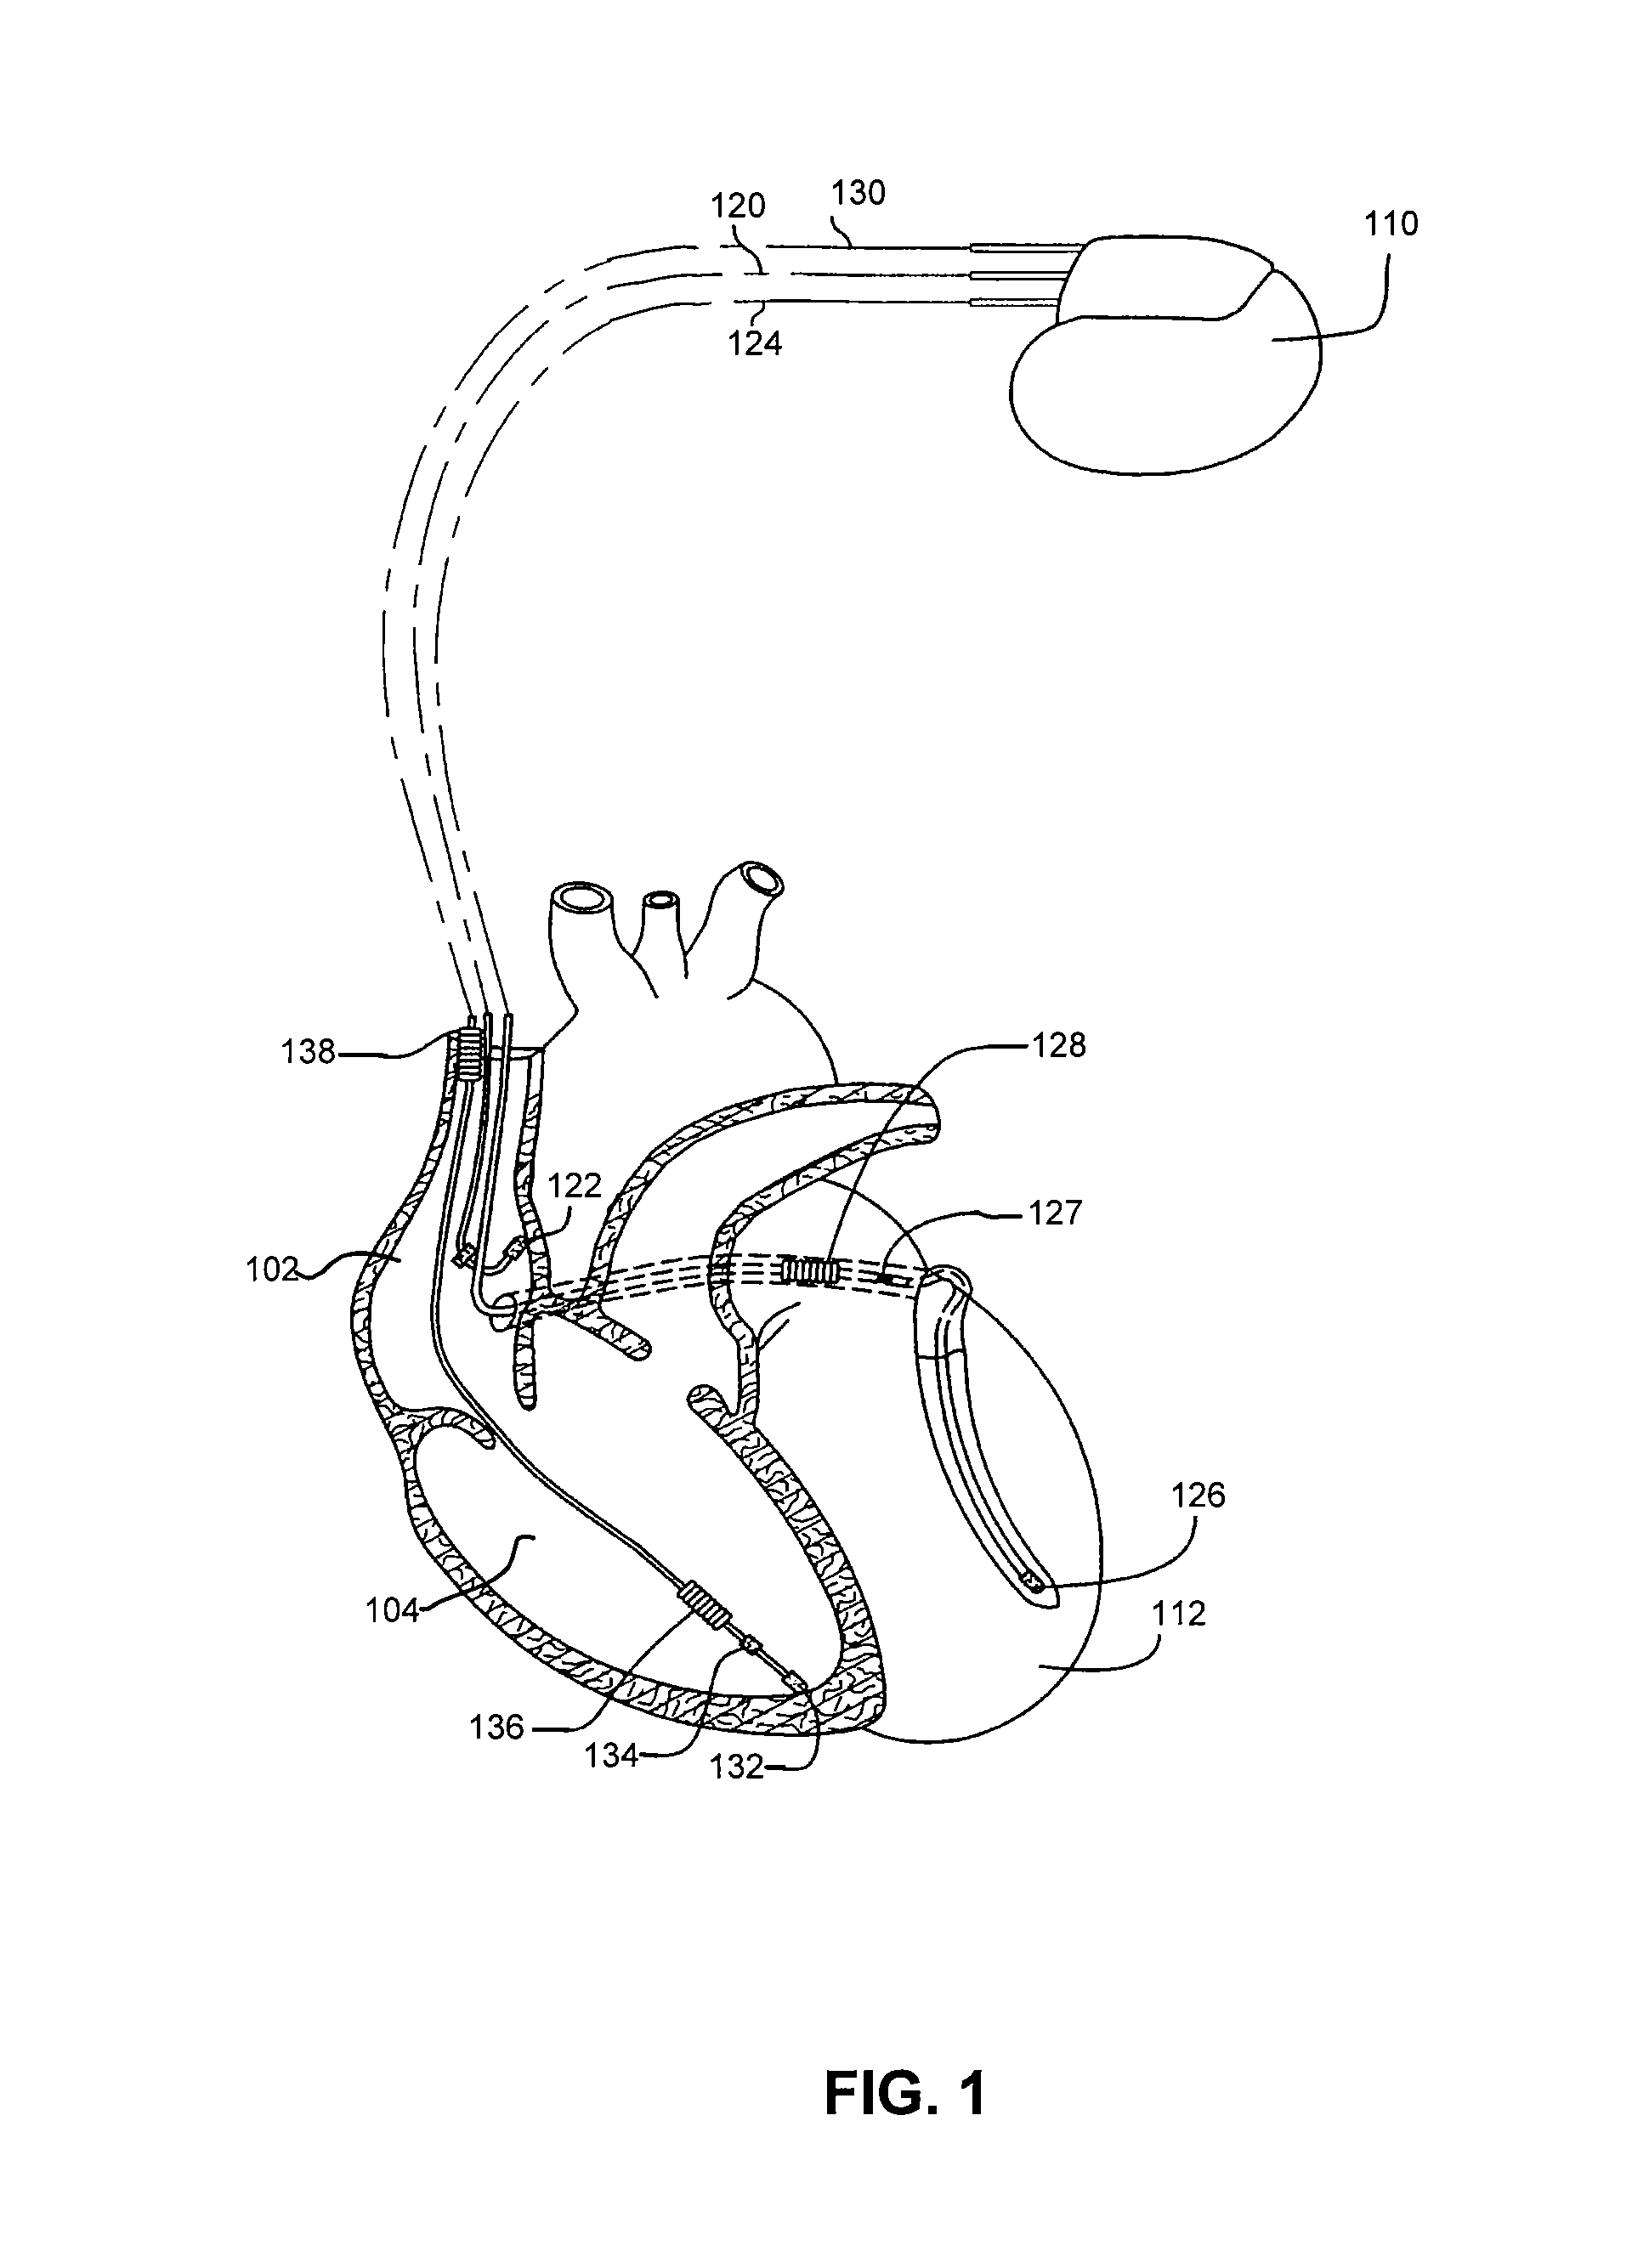 Method and apparatus for monitoring arrythmogenic effects of medications using an implantable device